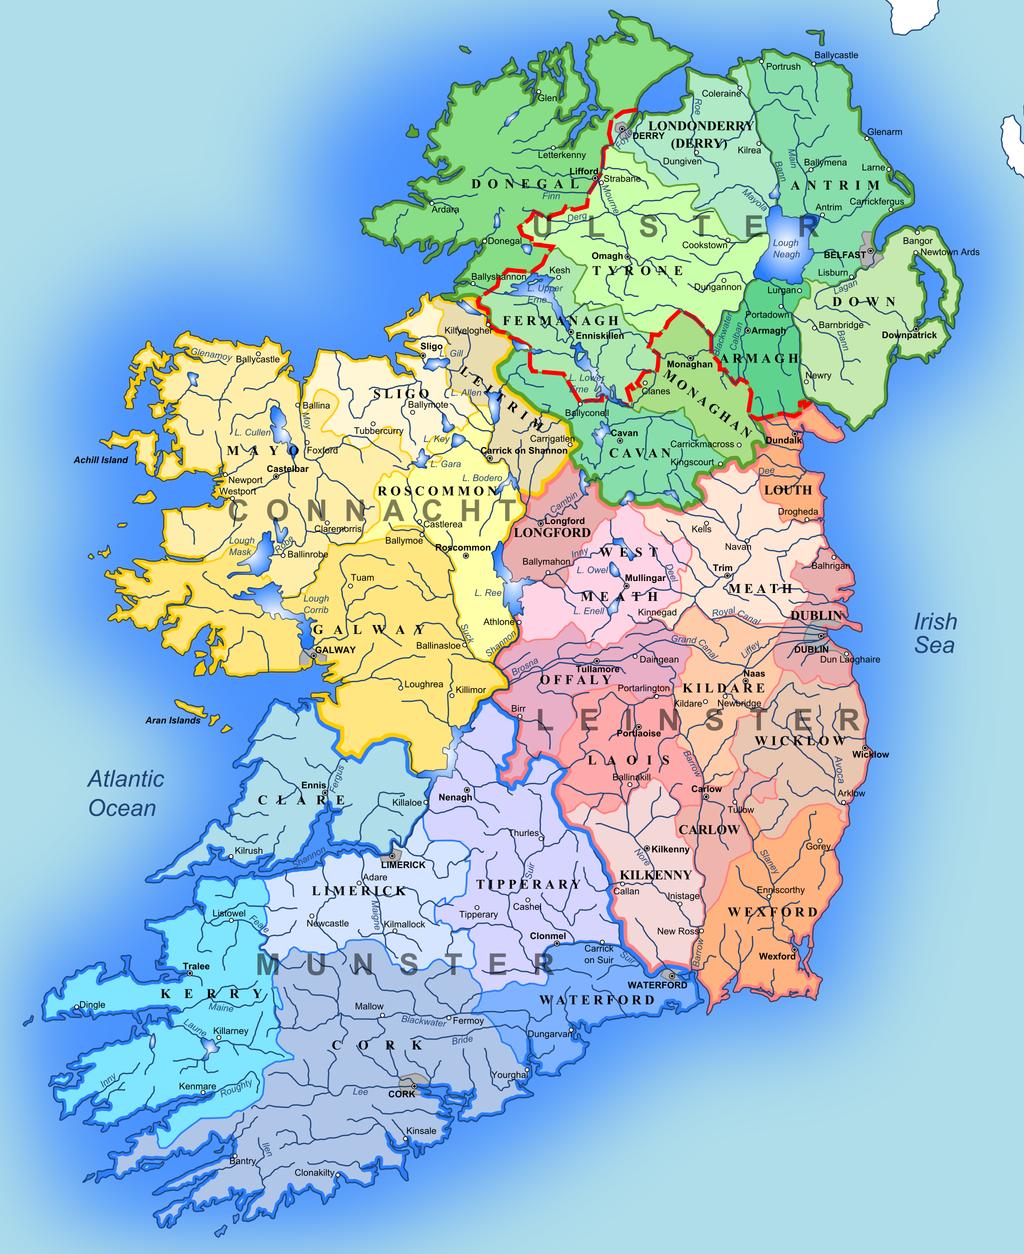 Appendix Appendix 1: Map of Ireland Map available at: